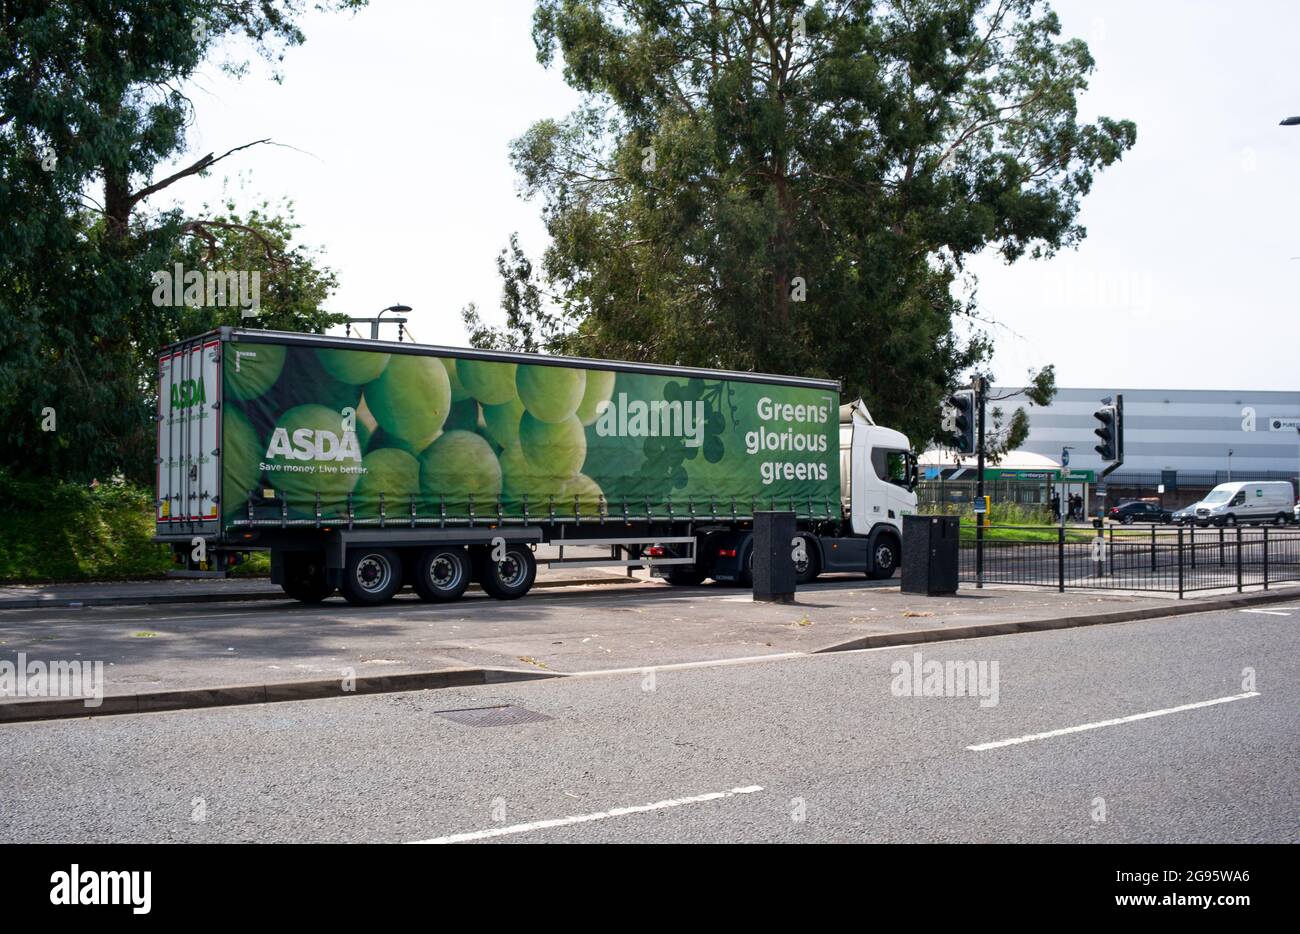 An Asda lorry transporting food goods to supermarkets drives through Southampton after delivering to the city centre superstore. Stock Photo